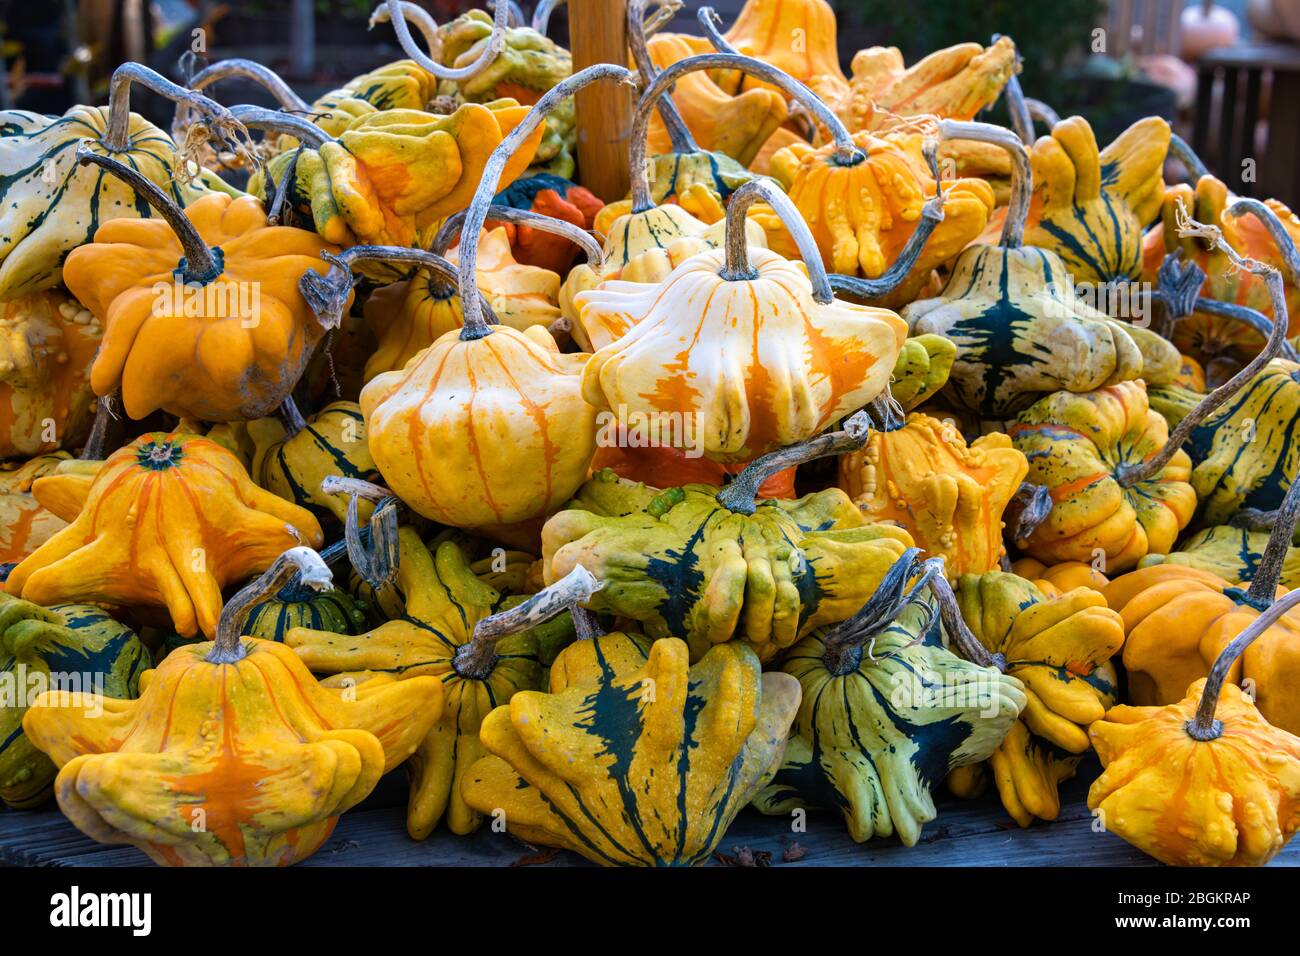 Pile of Decorative Gourds Stock Photo